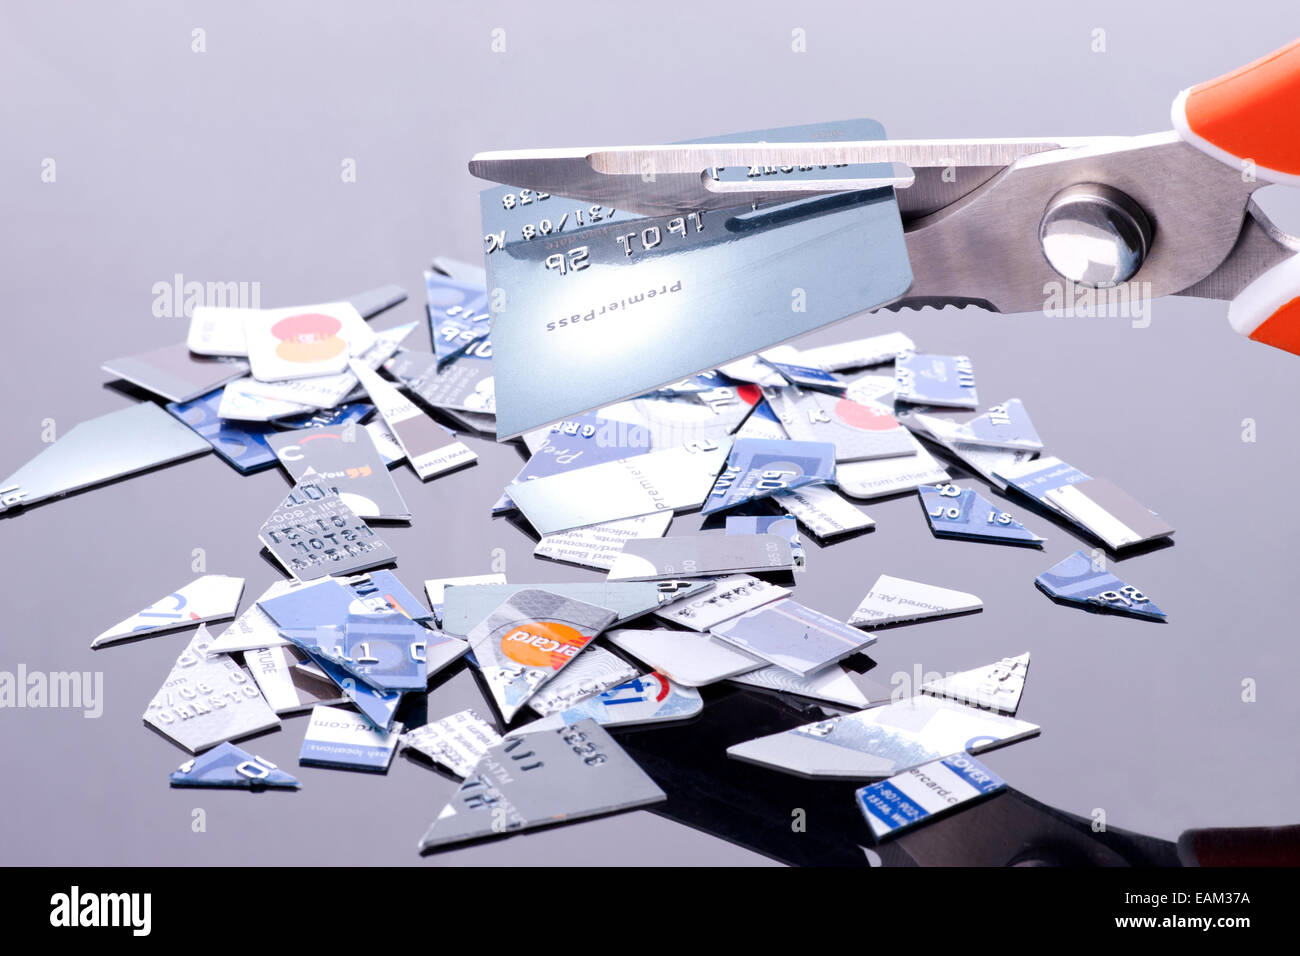 The act of cutting up credit cards for financial freedom. Stock Photo